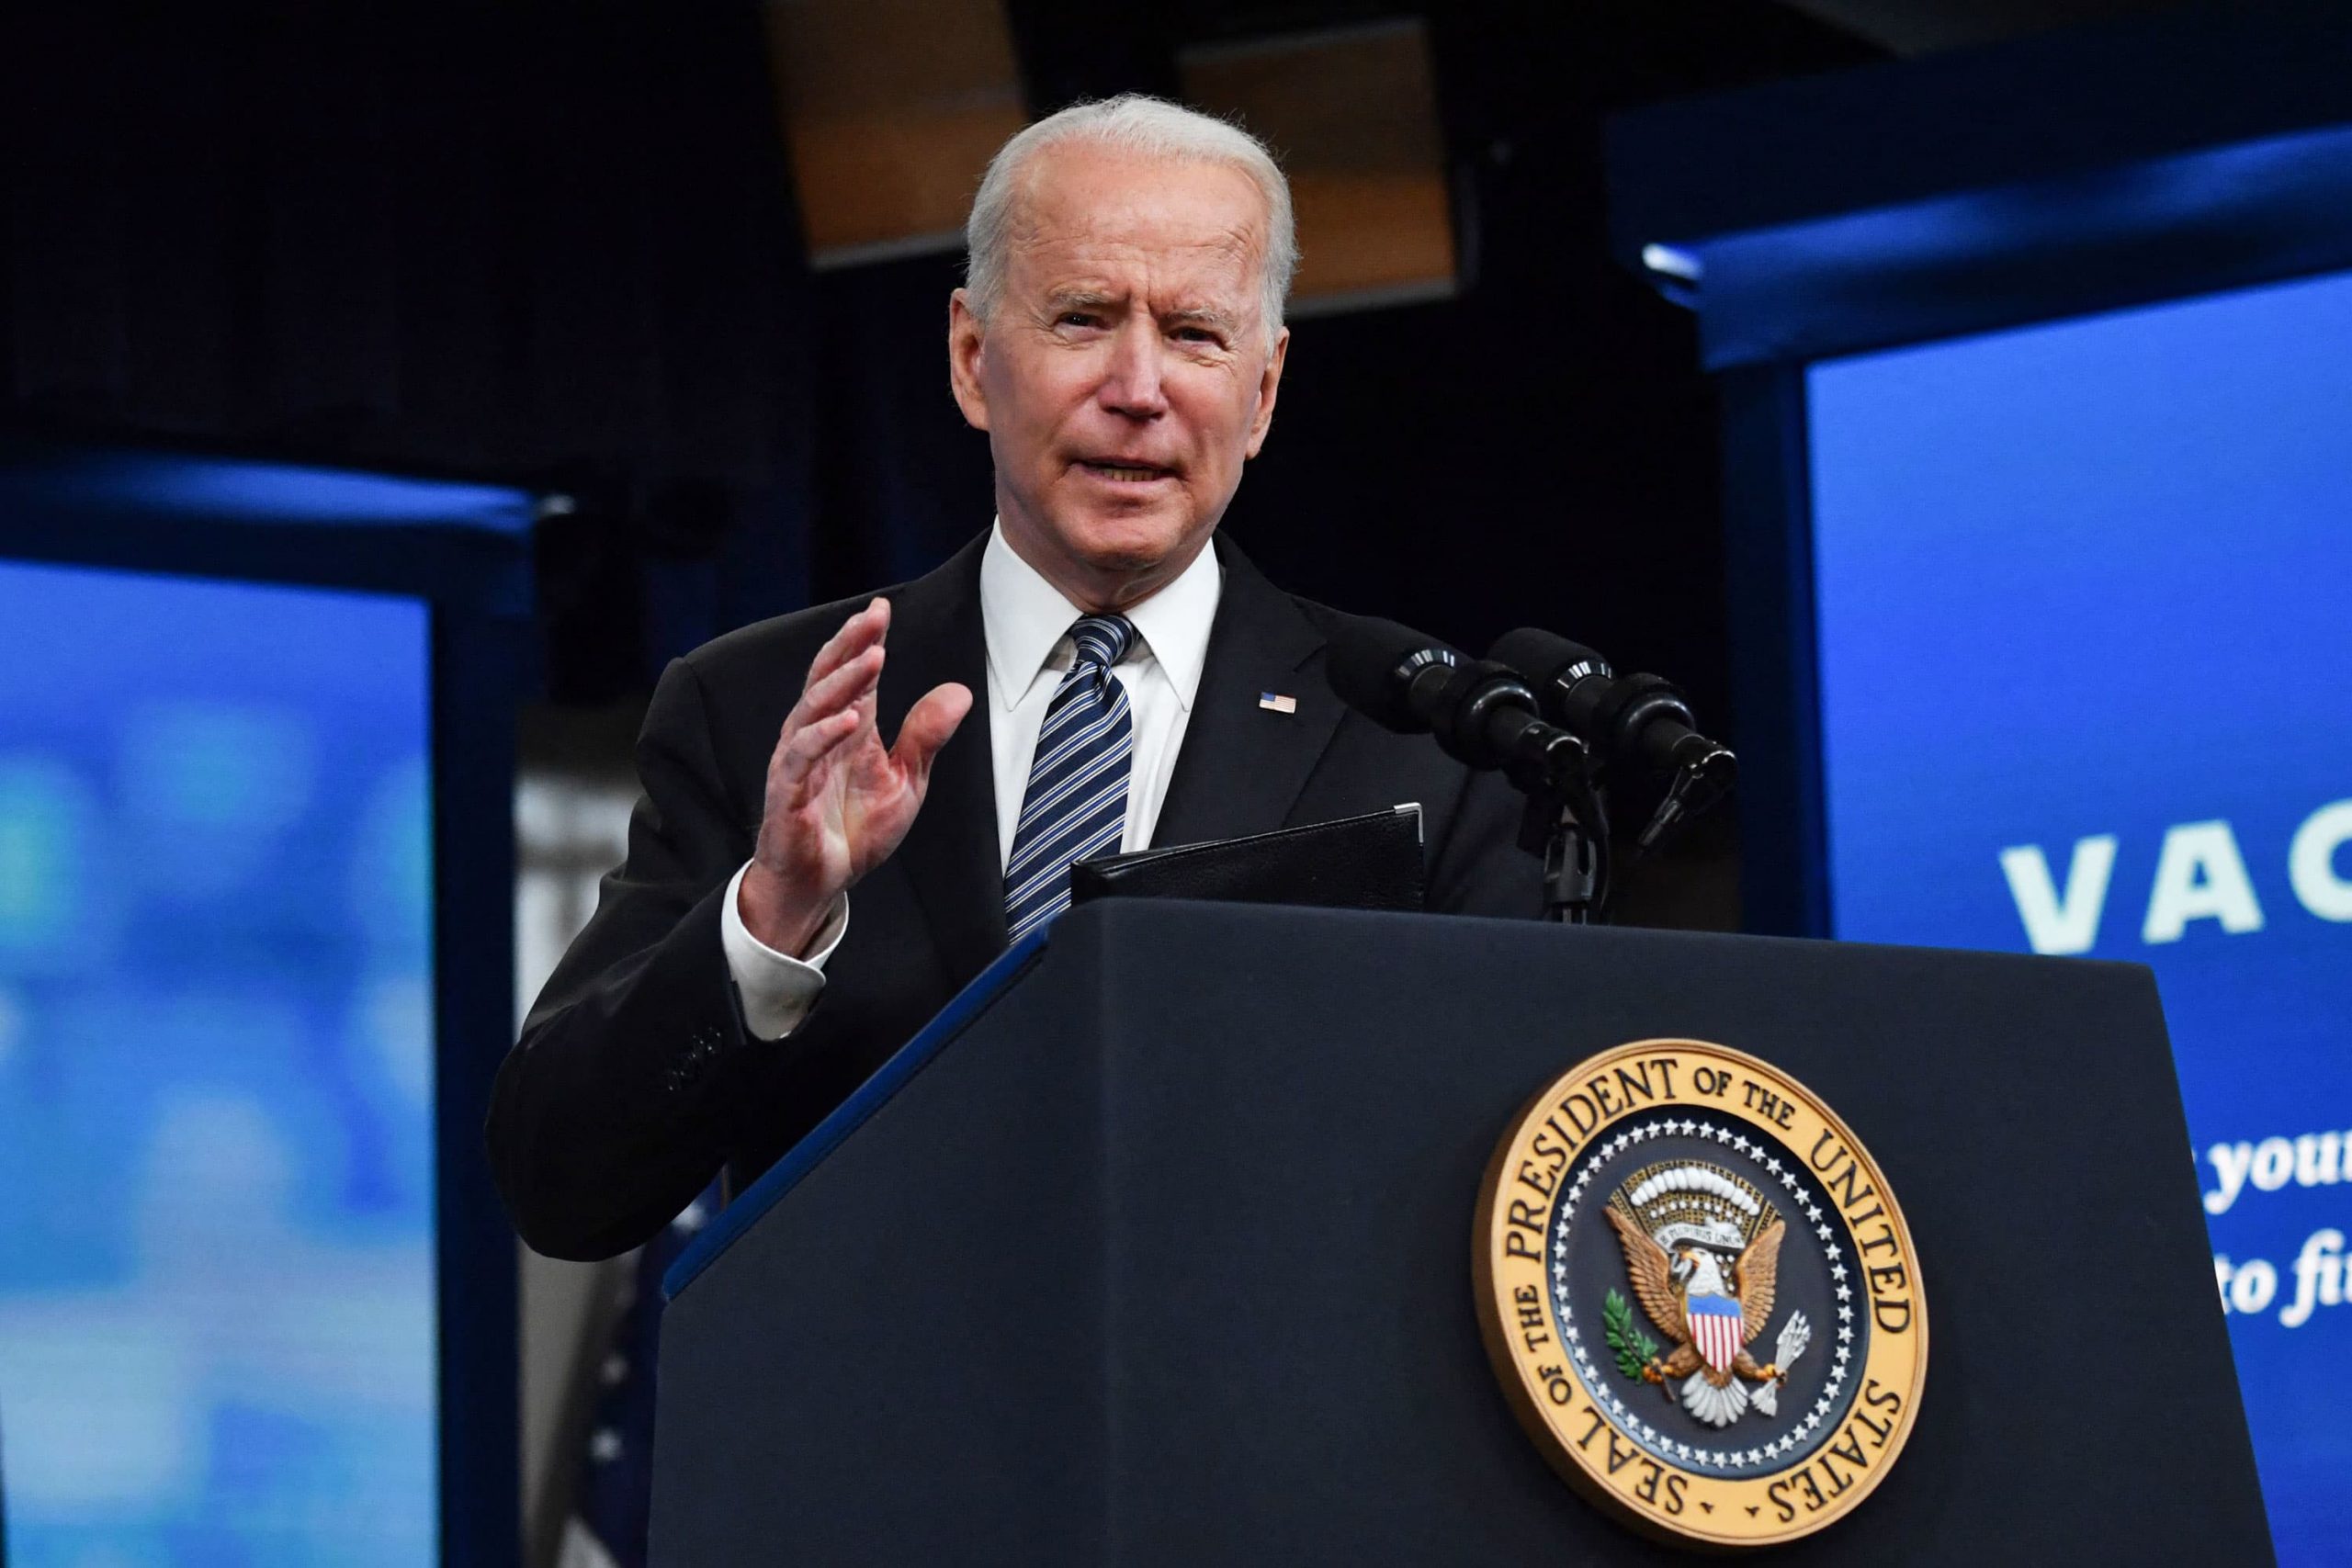 Biden urges parents to get kids vaccinated after CDC panel endorses Pfizer Covid vaccine